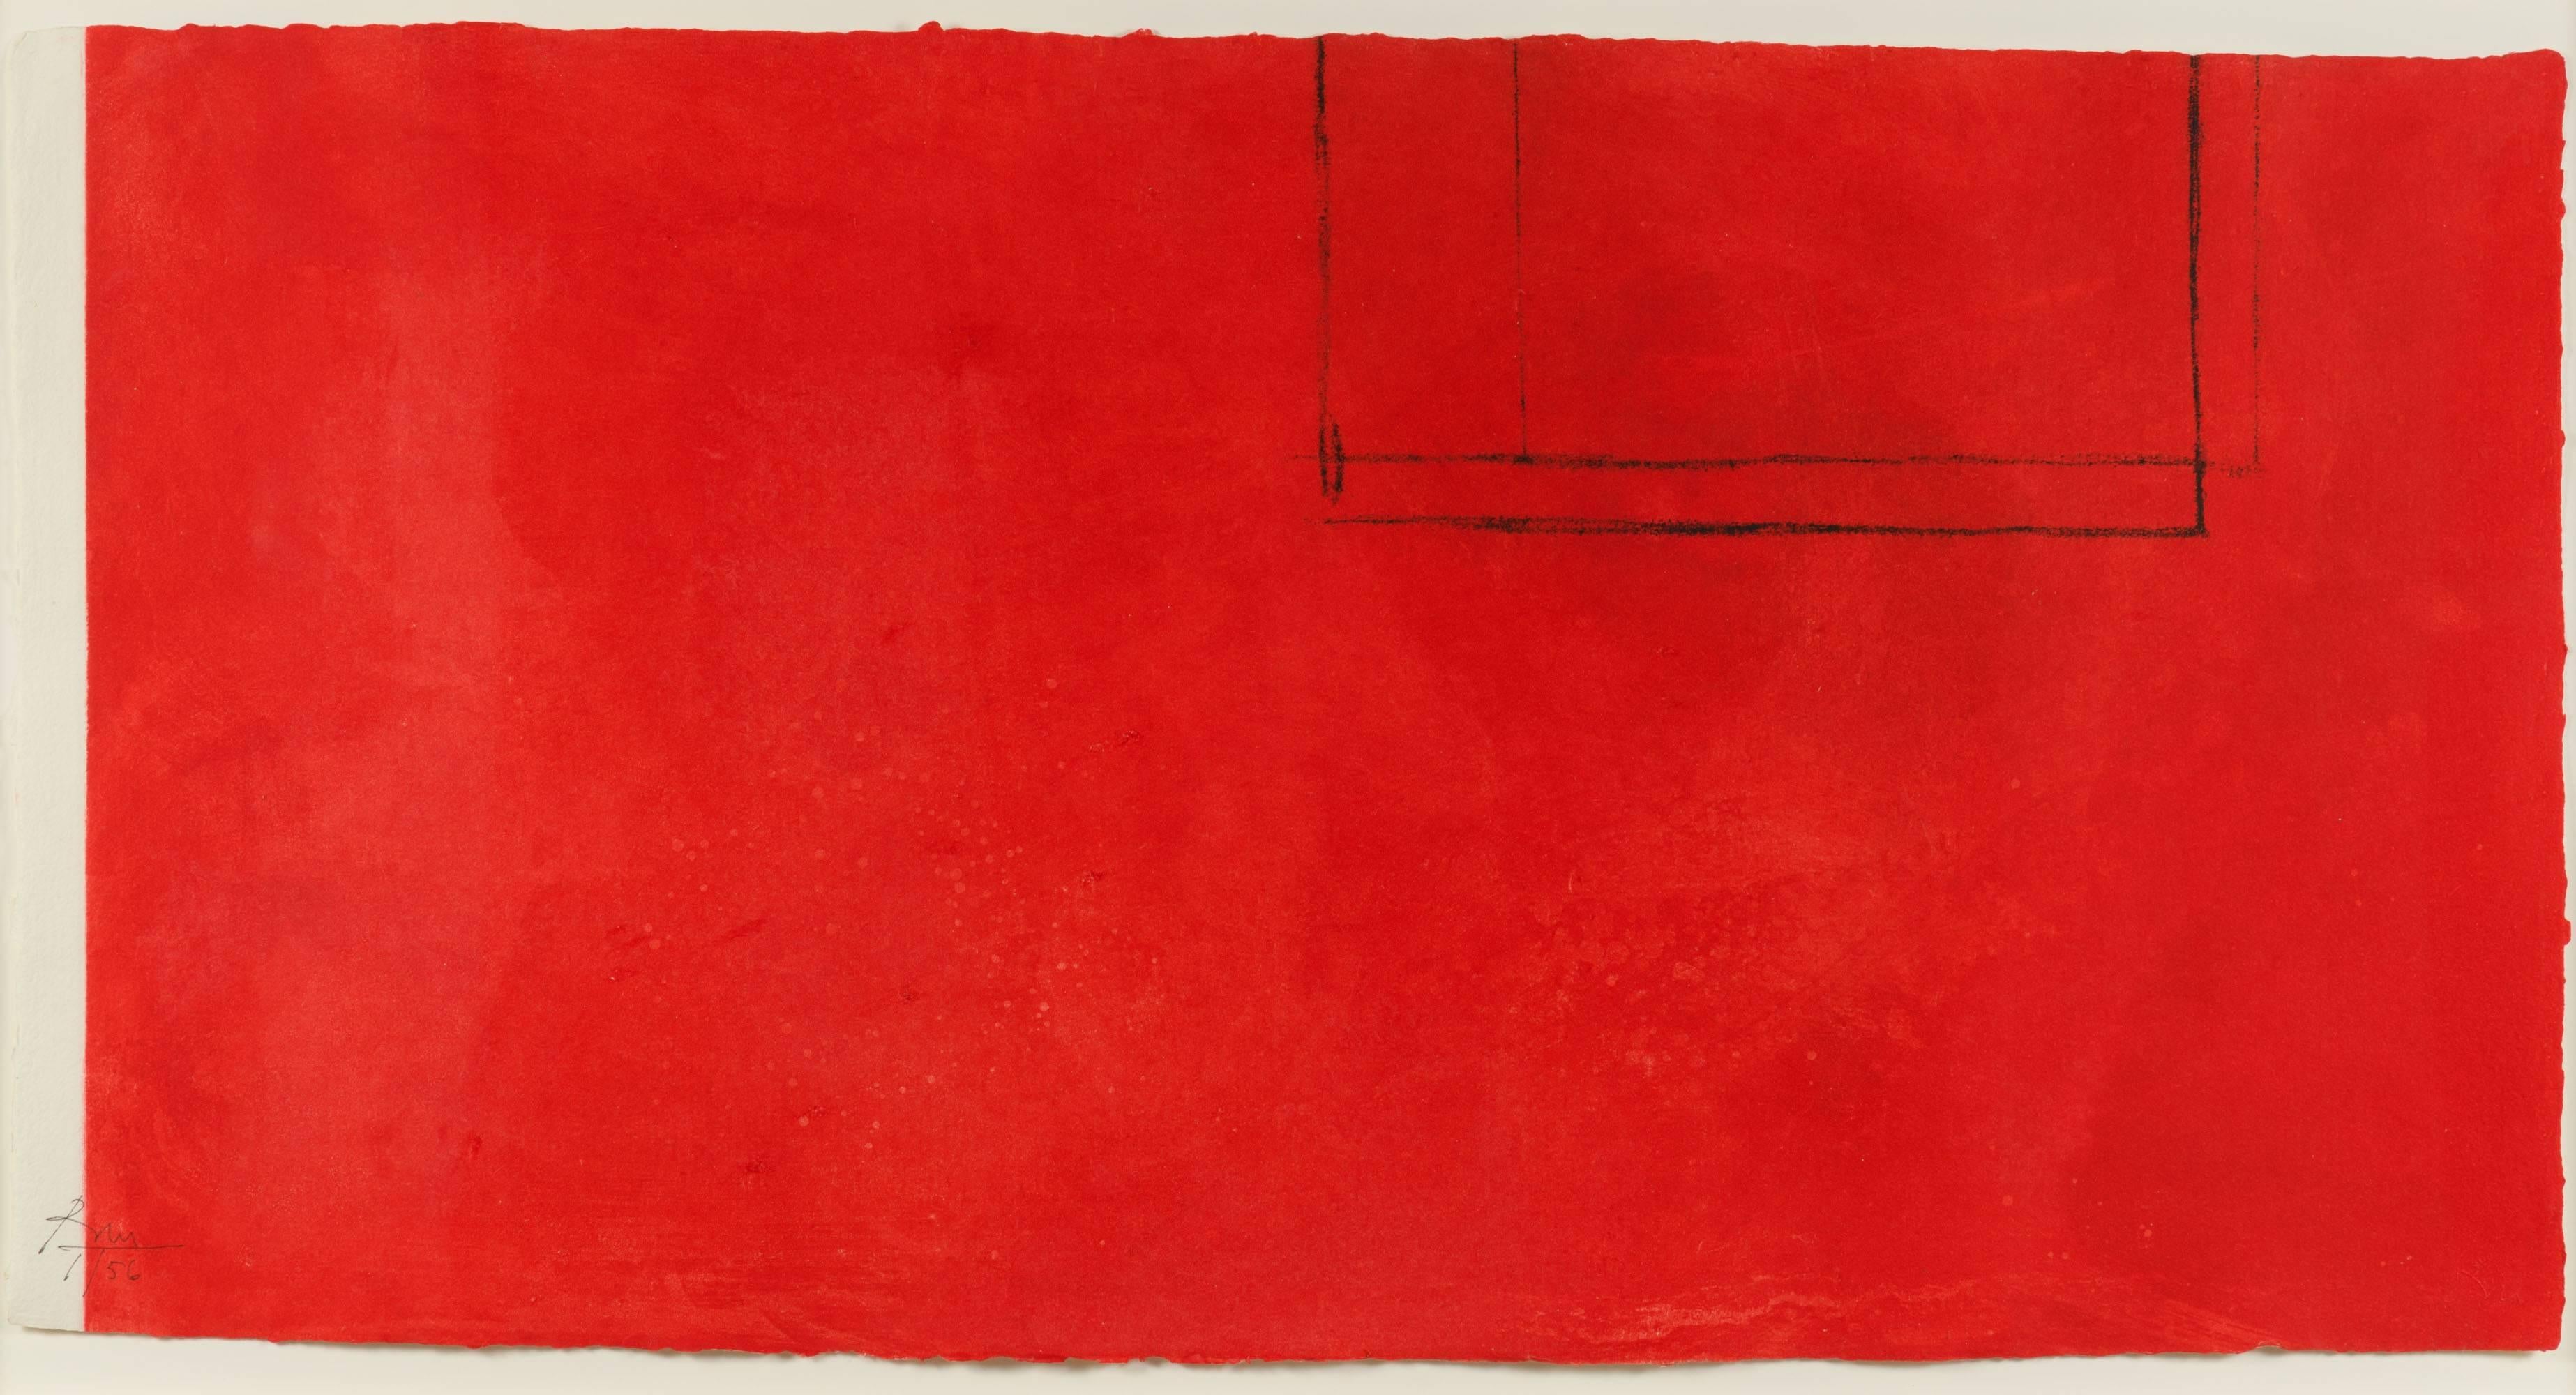 Red Open with White Line - Print by Robert Motherwell